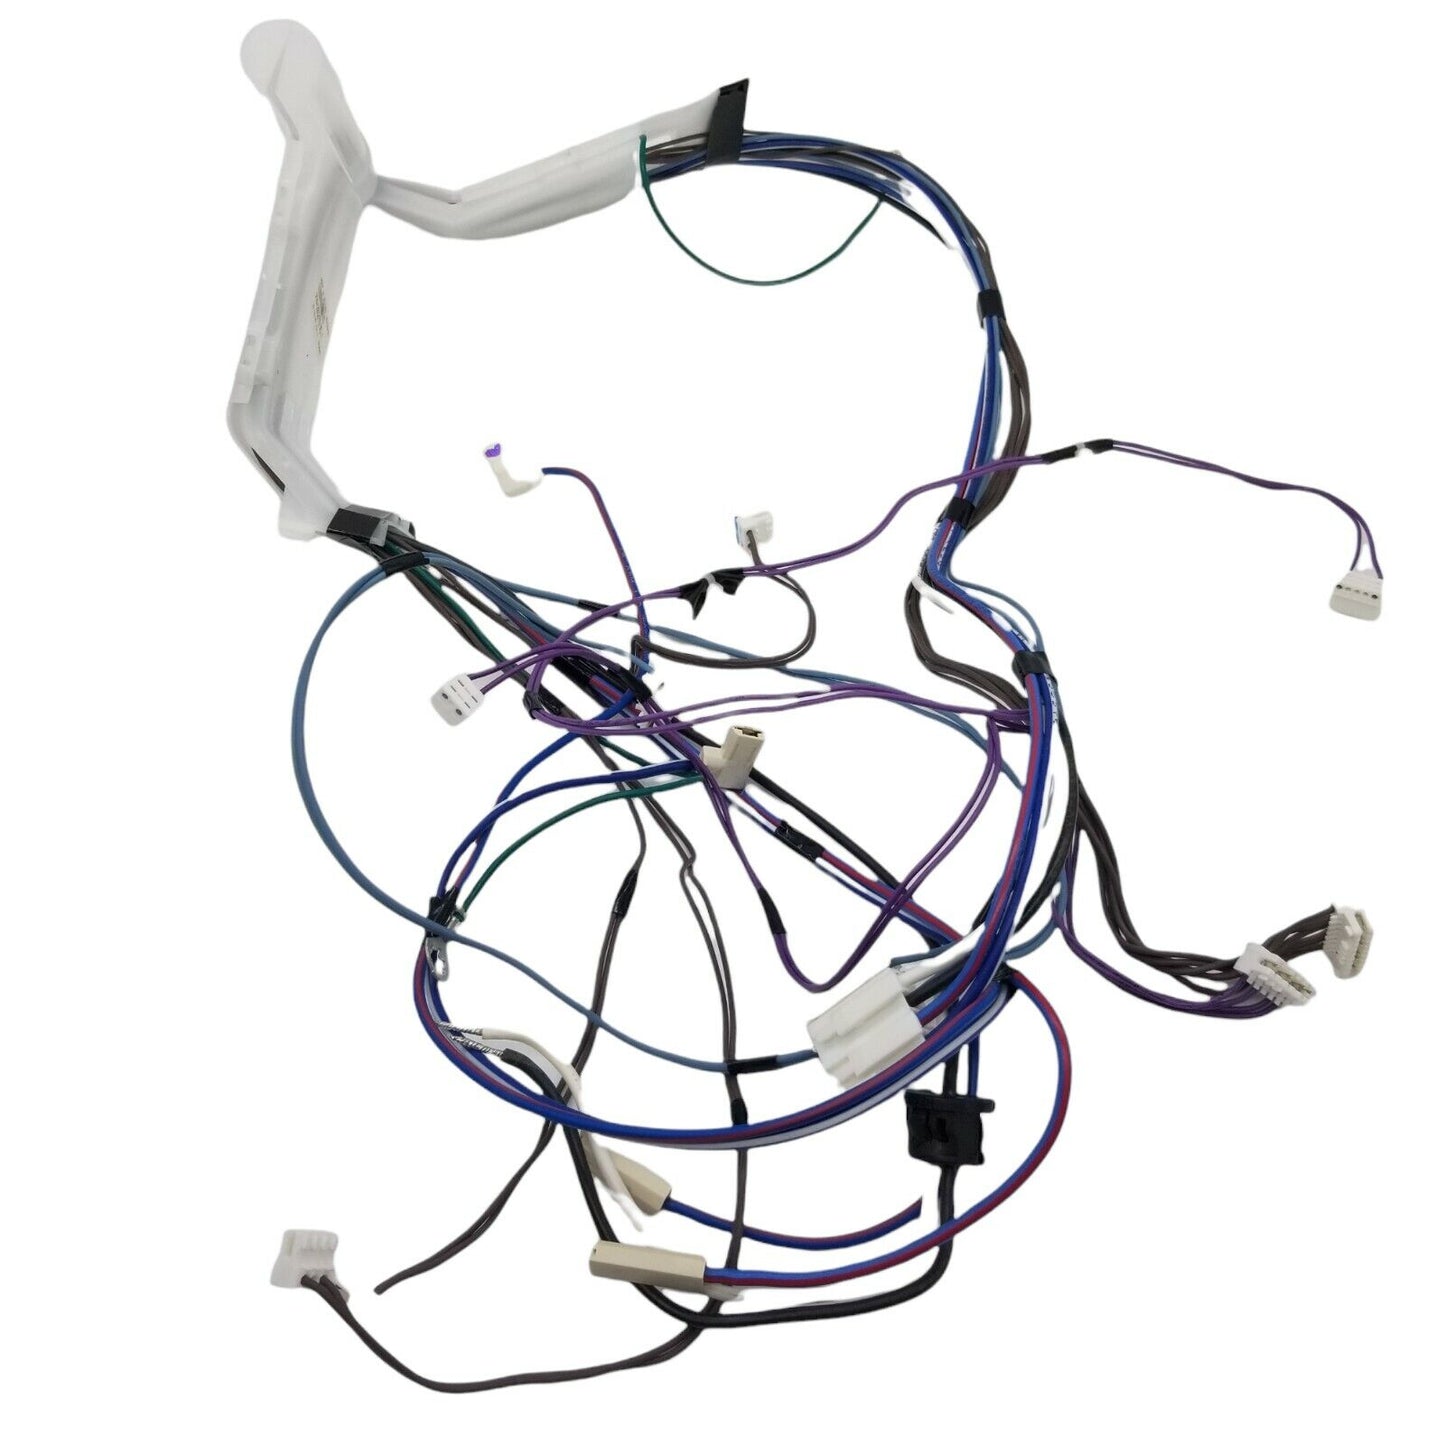 Replacement for Whirlpool Dishwasher Wire Harness W10832778